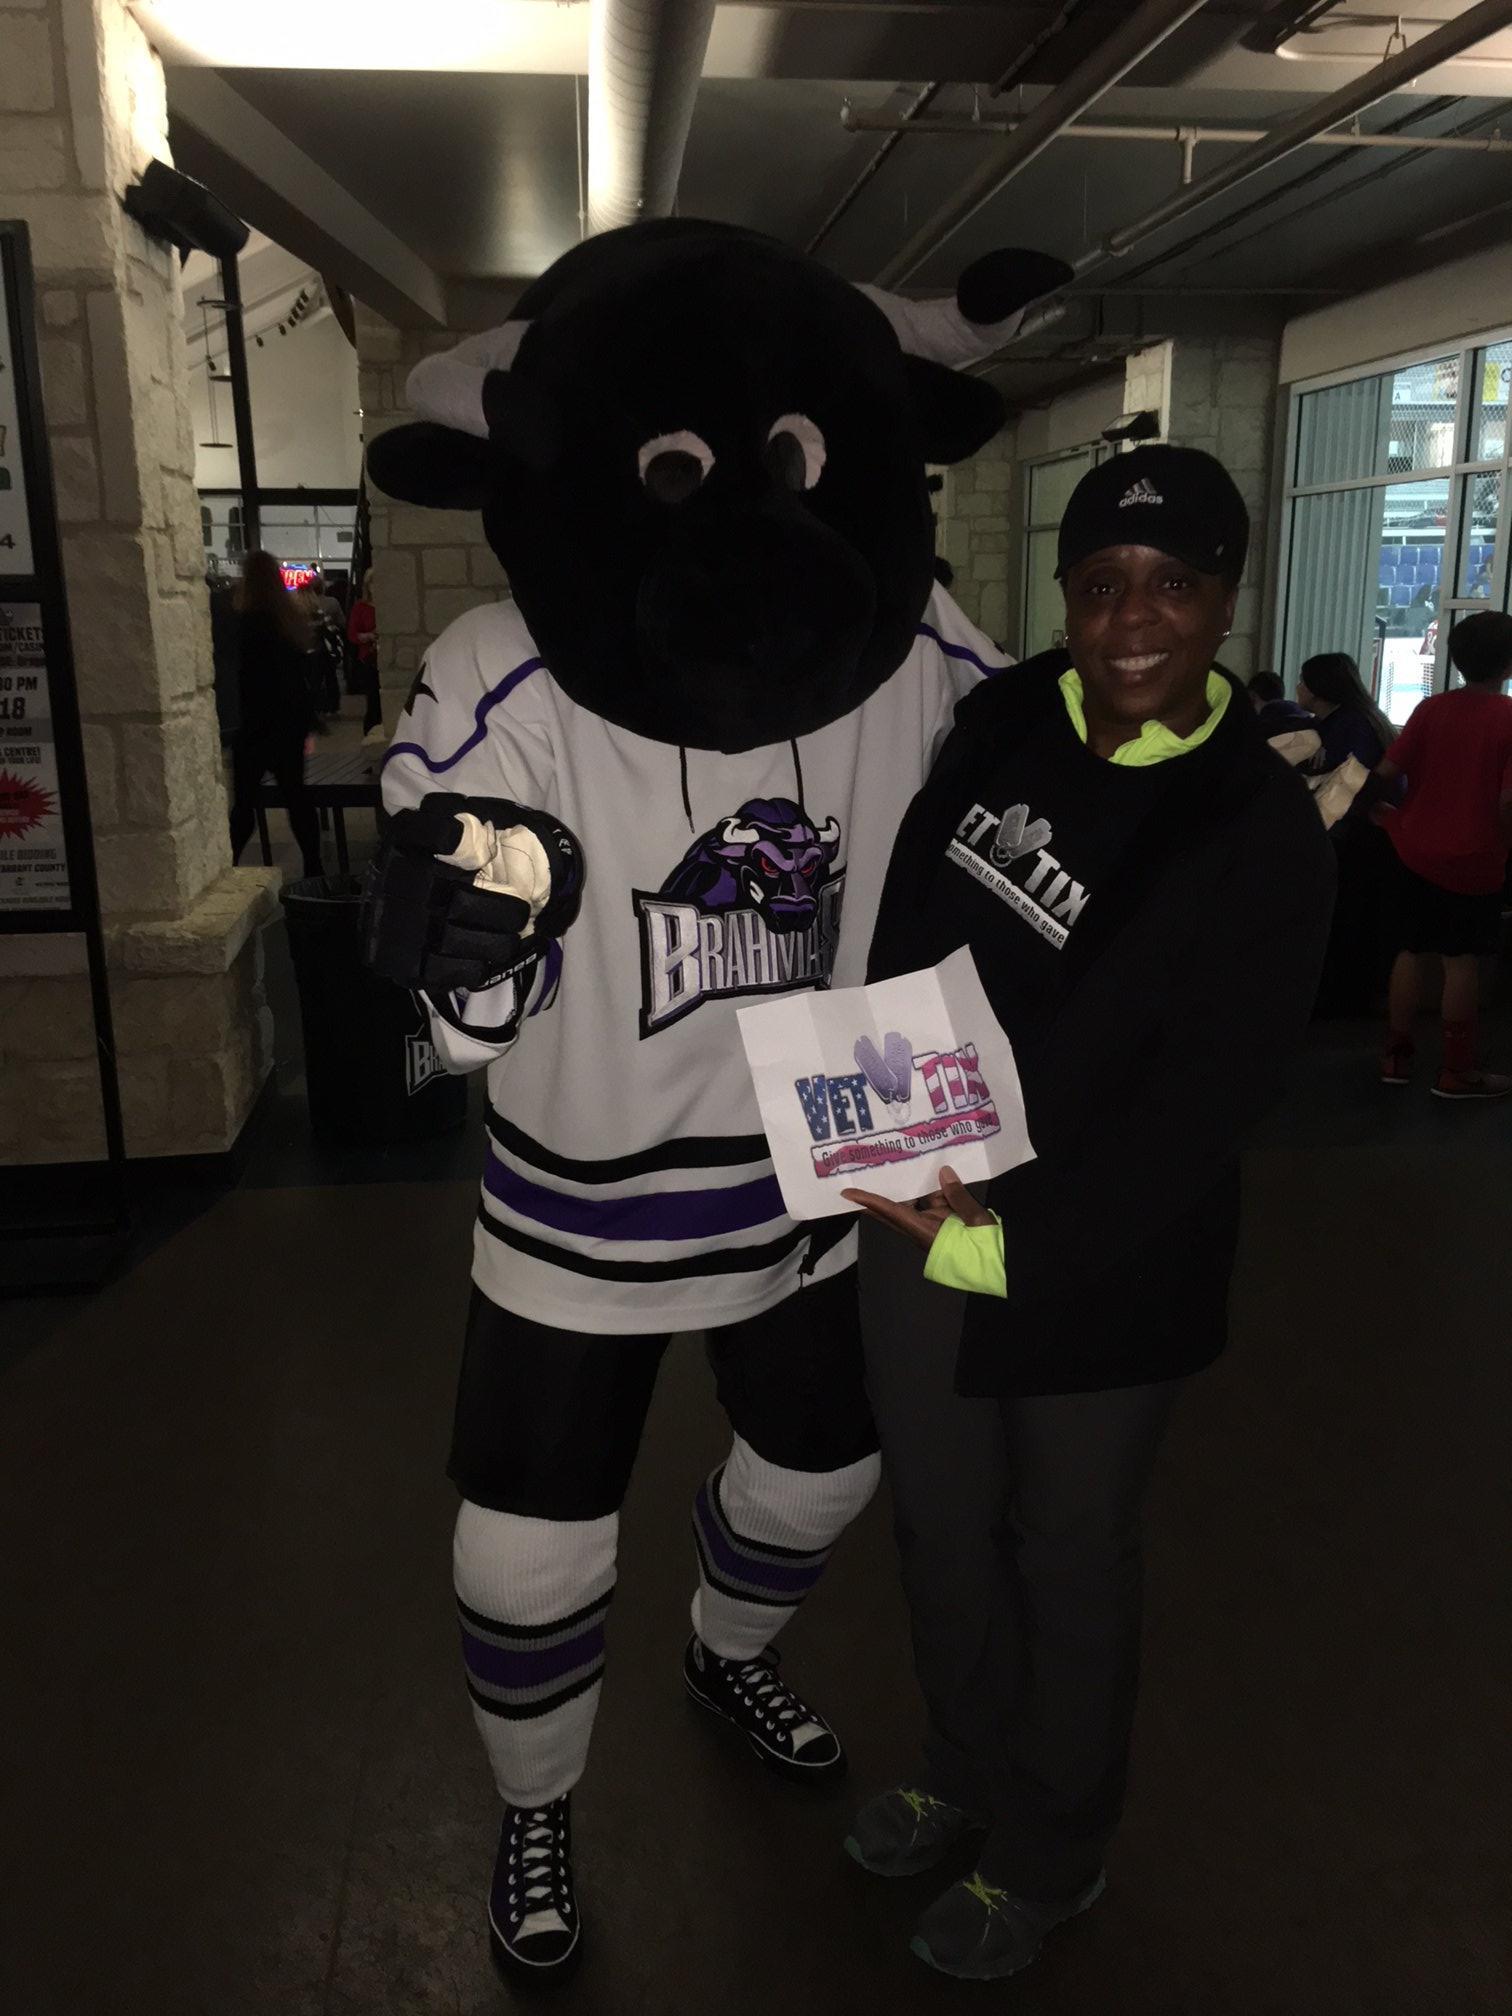 IT'S NATIONAL MASCOT DAY TODAY! WE - Lone Star Brahmas